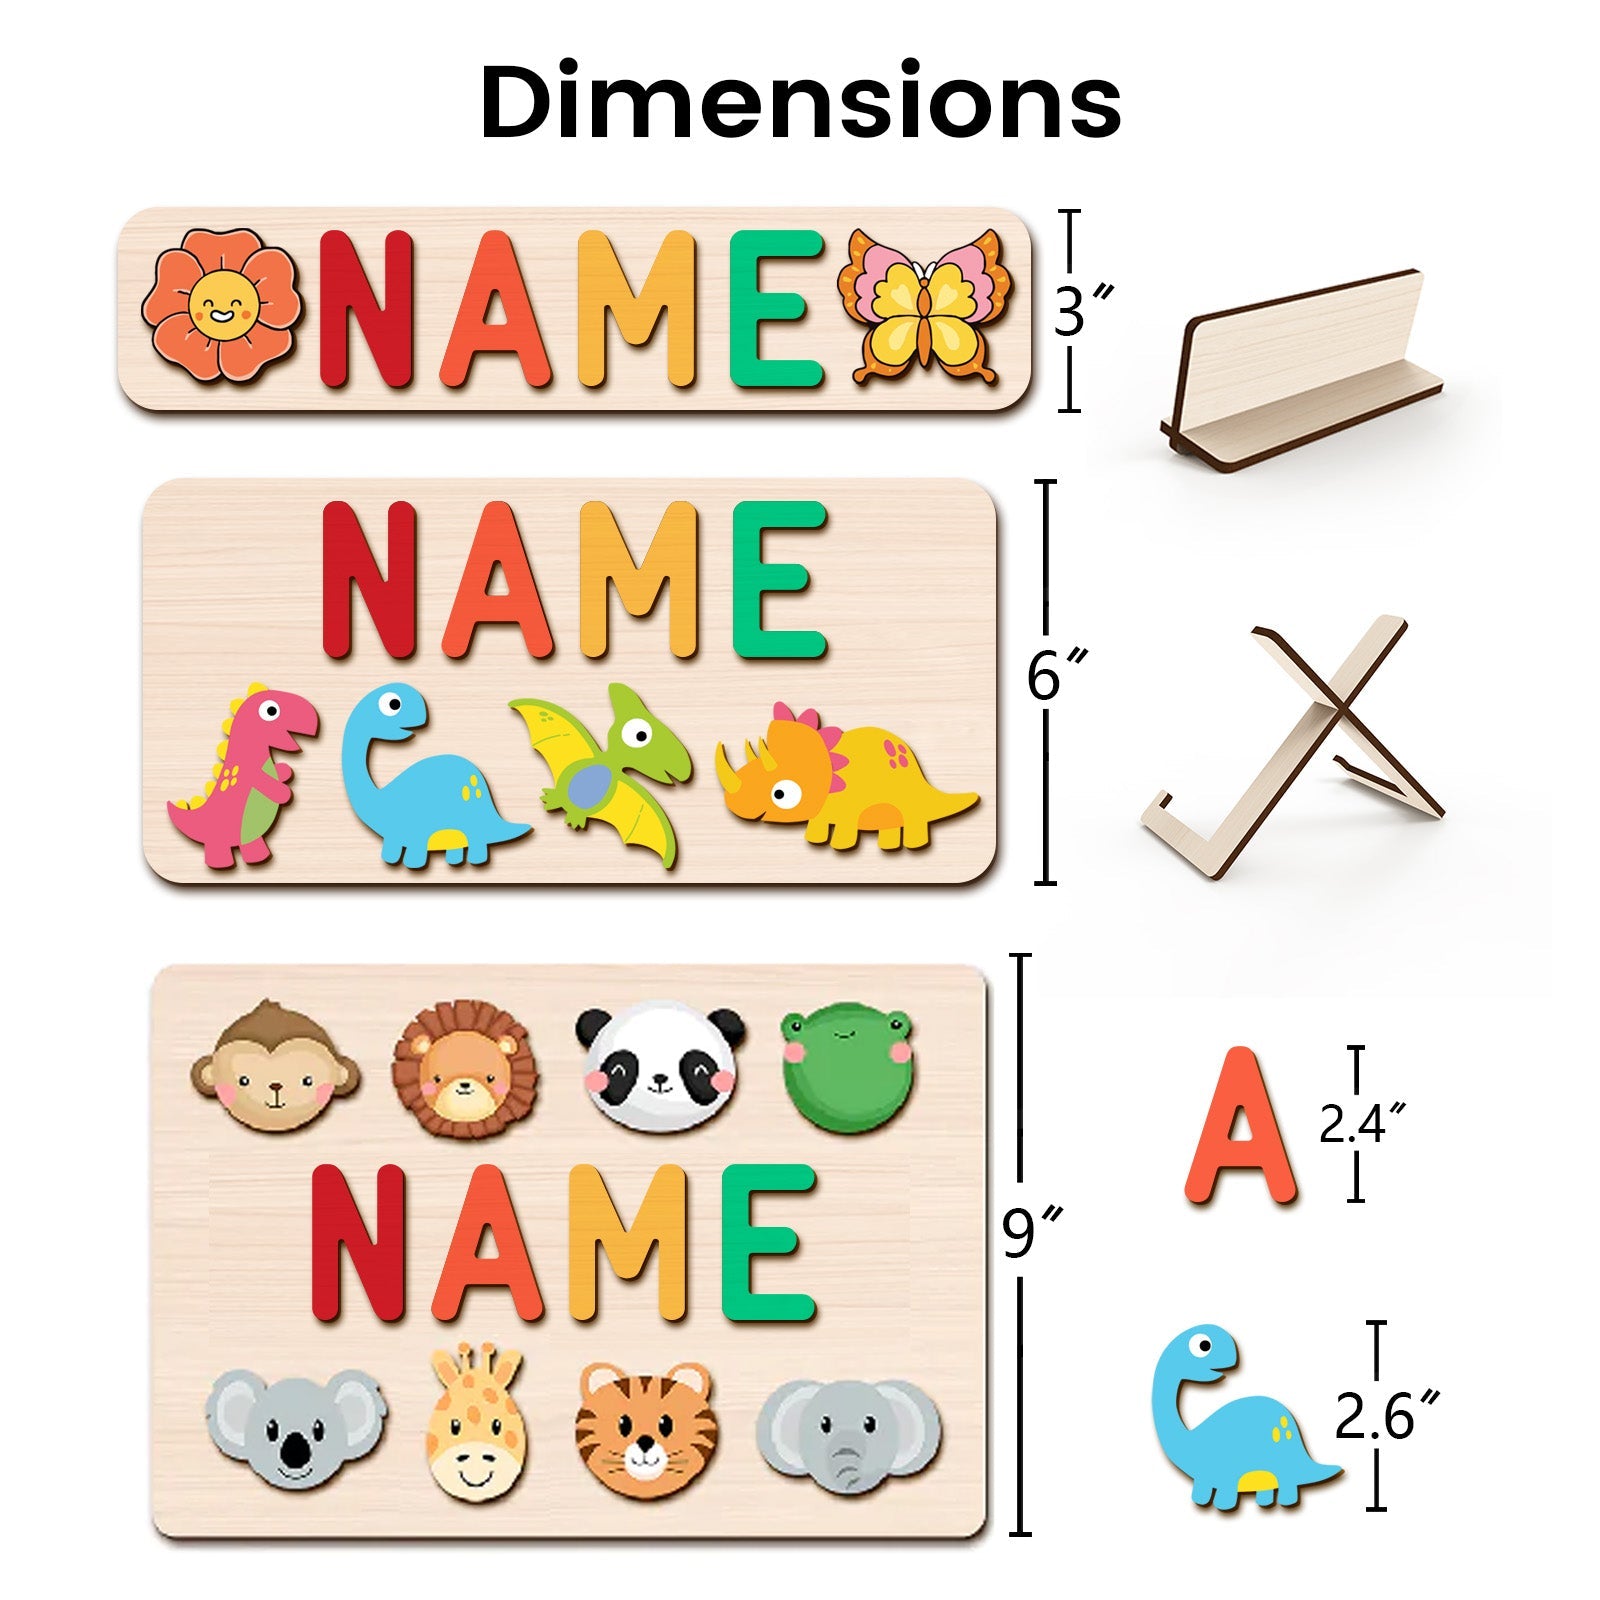 Personalized Wooden Baby Name Puzzle with Animals Product Name: Personalized Wooden Baby Name Puzzle with Animals Material: Eco-Friendly Plywood BasswoodLetters Available: Up to 10Engraving Messages: AvailableNon-Toxic: YesNon-Harmful: Yes Color: Pastel-b